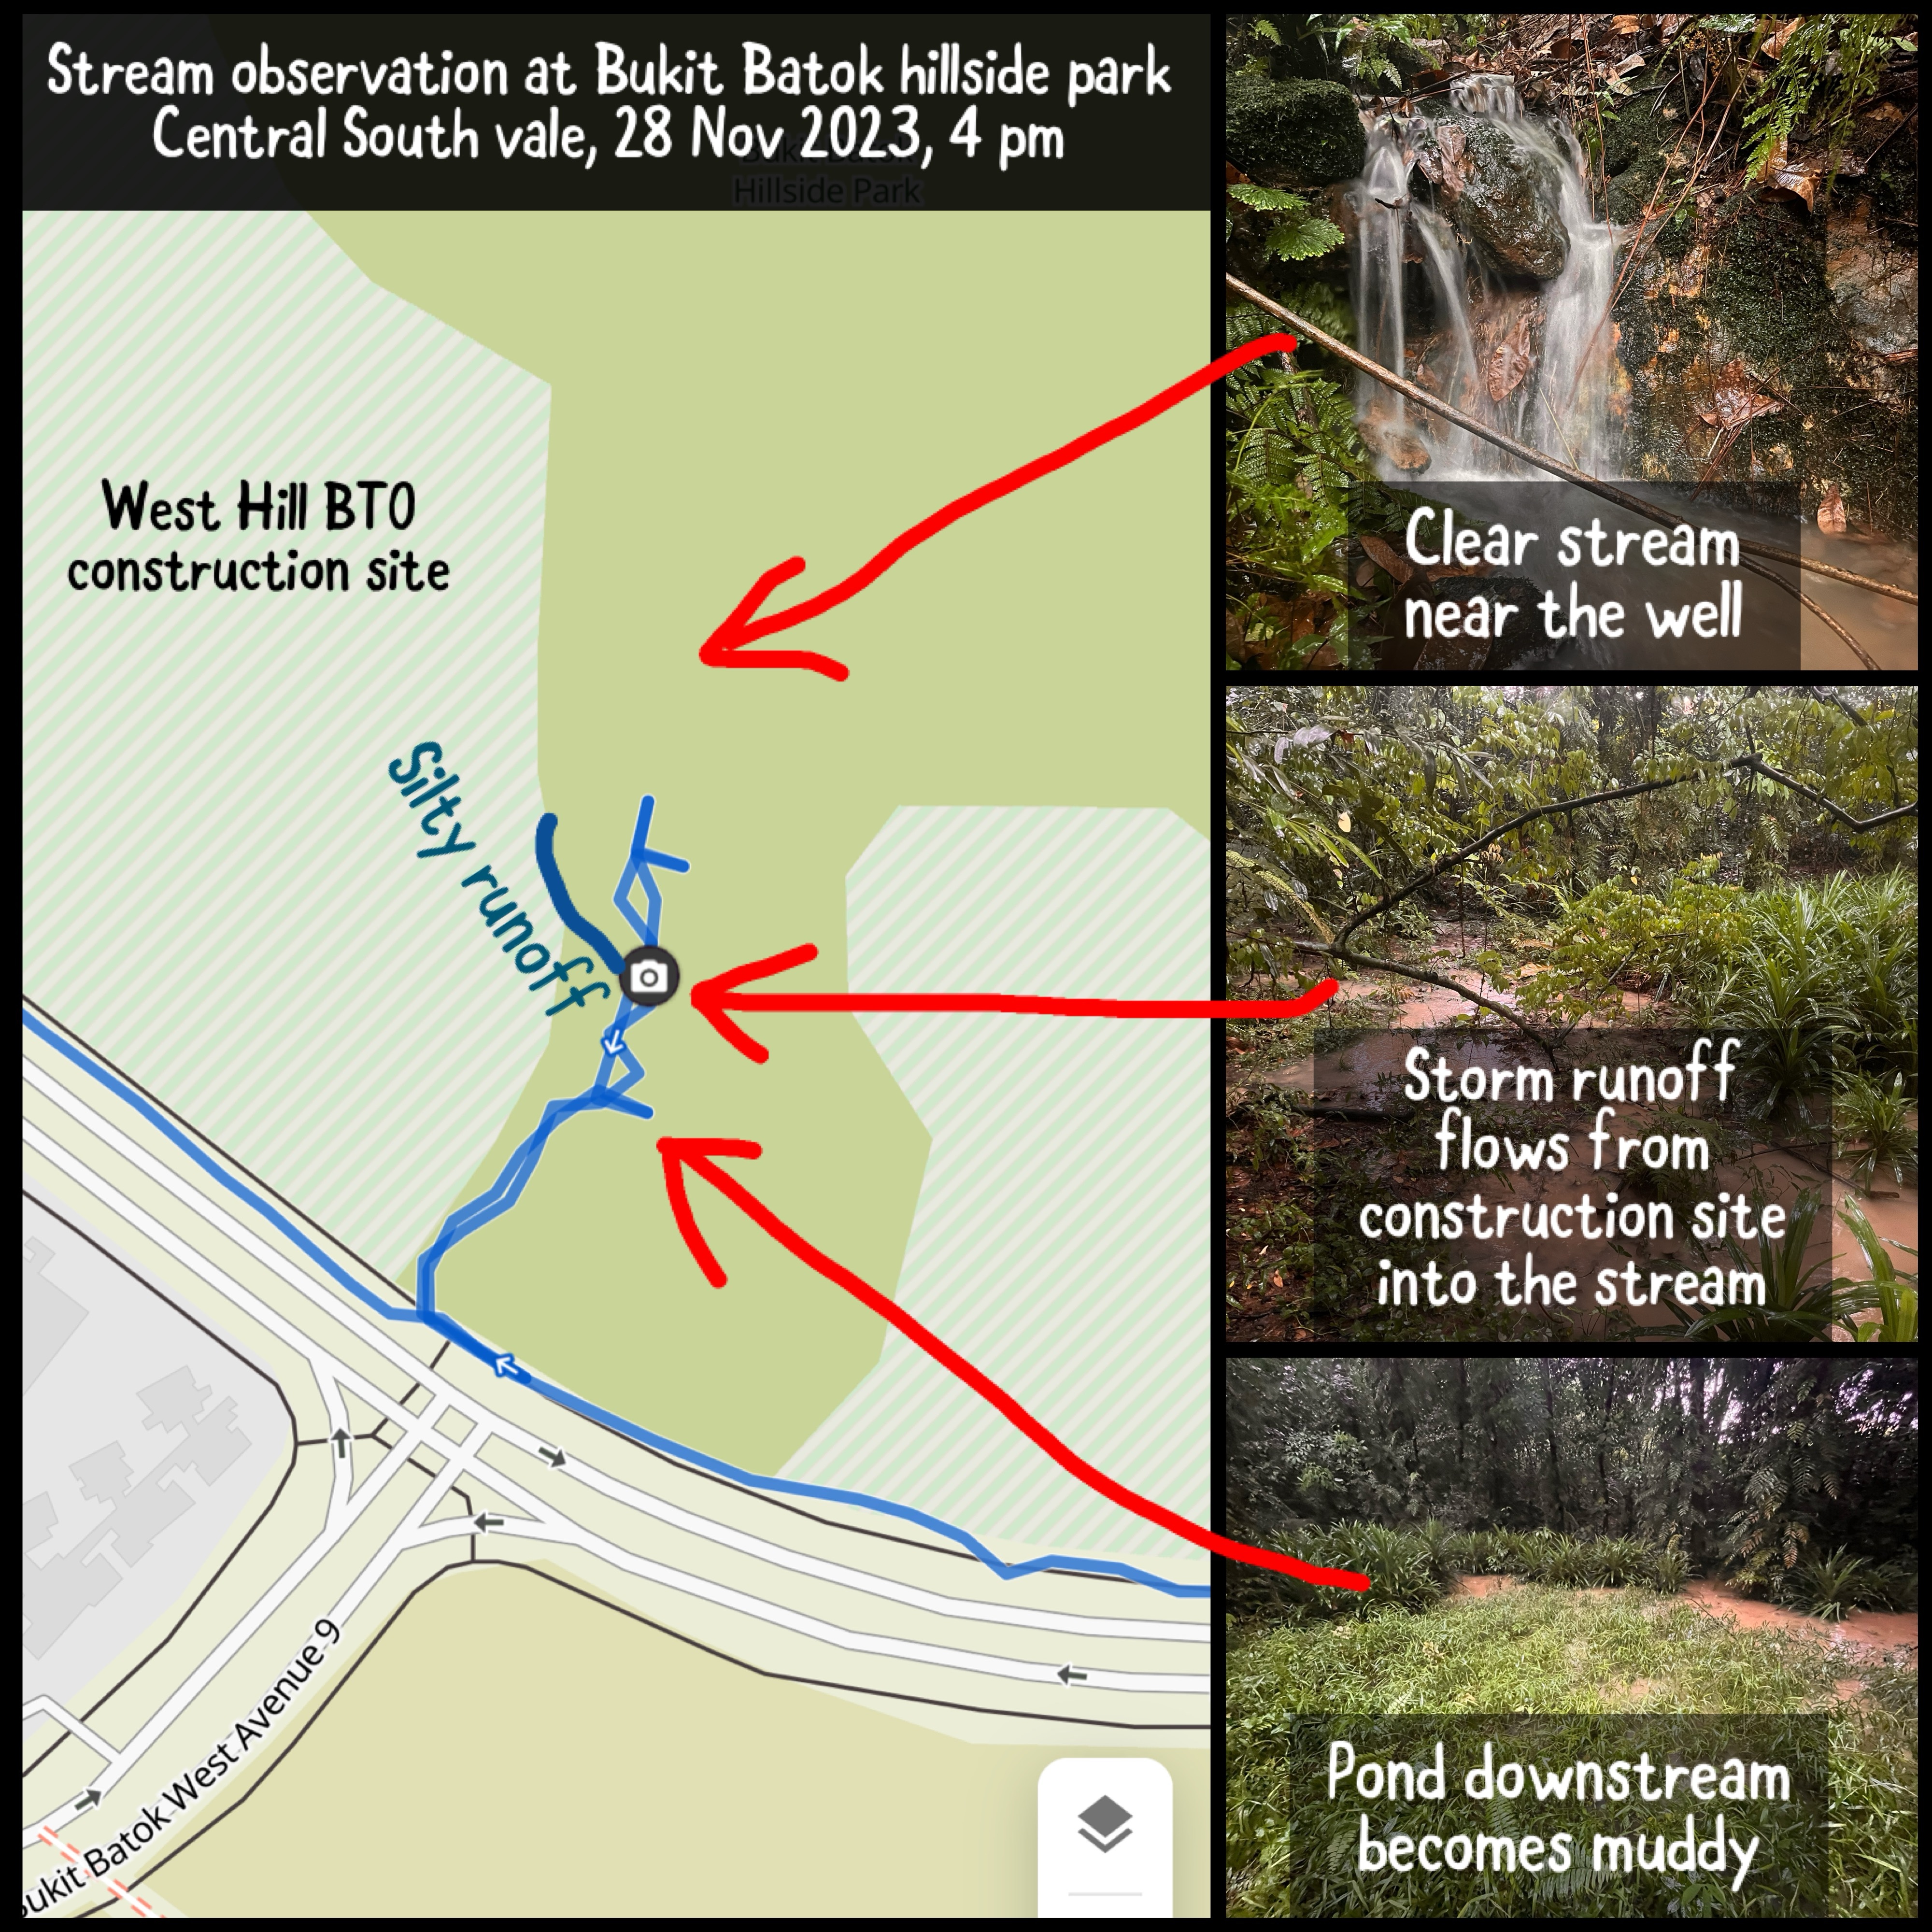 Bukit Batok hillside park: Water pollution of rare natural freshwater stream caused by silty runoff from construction site